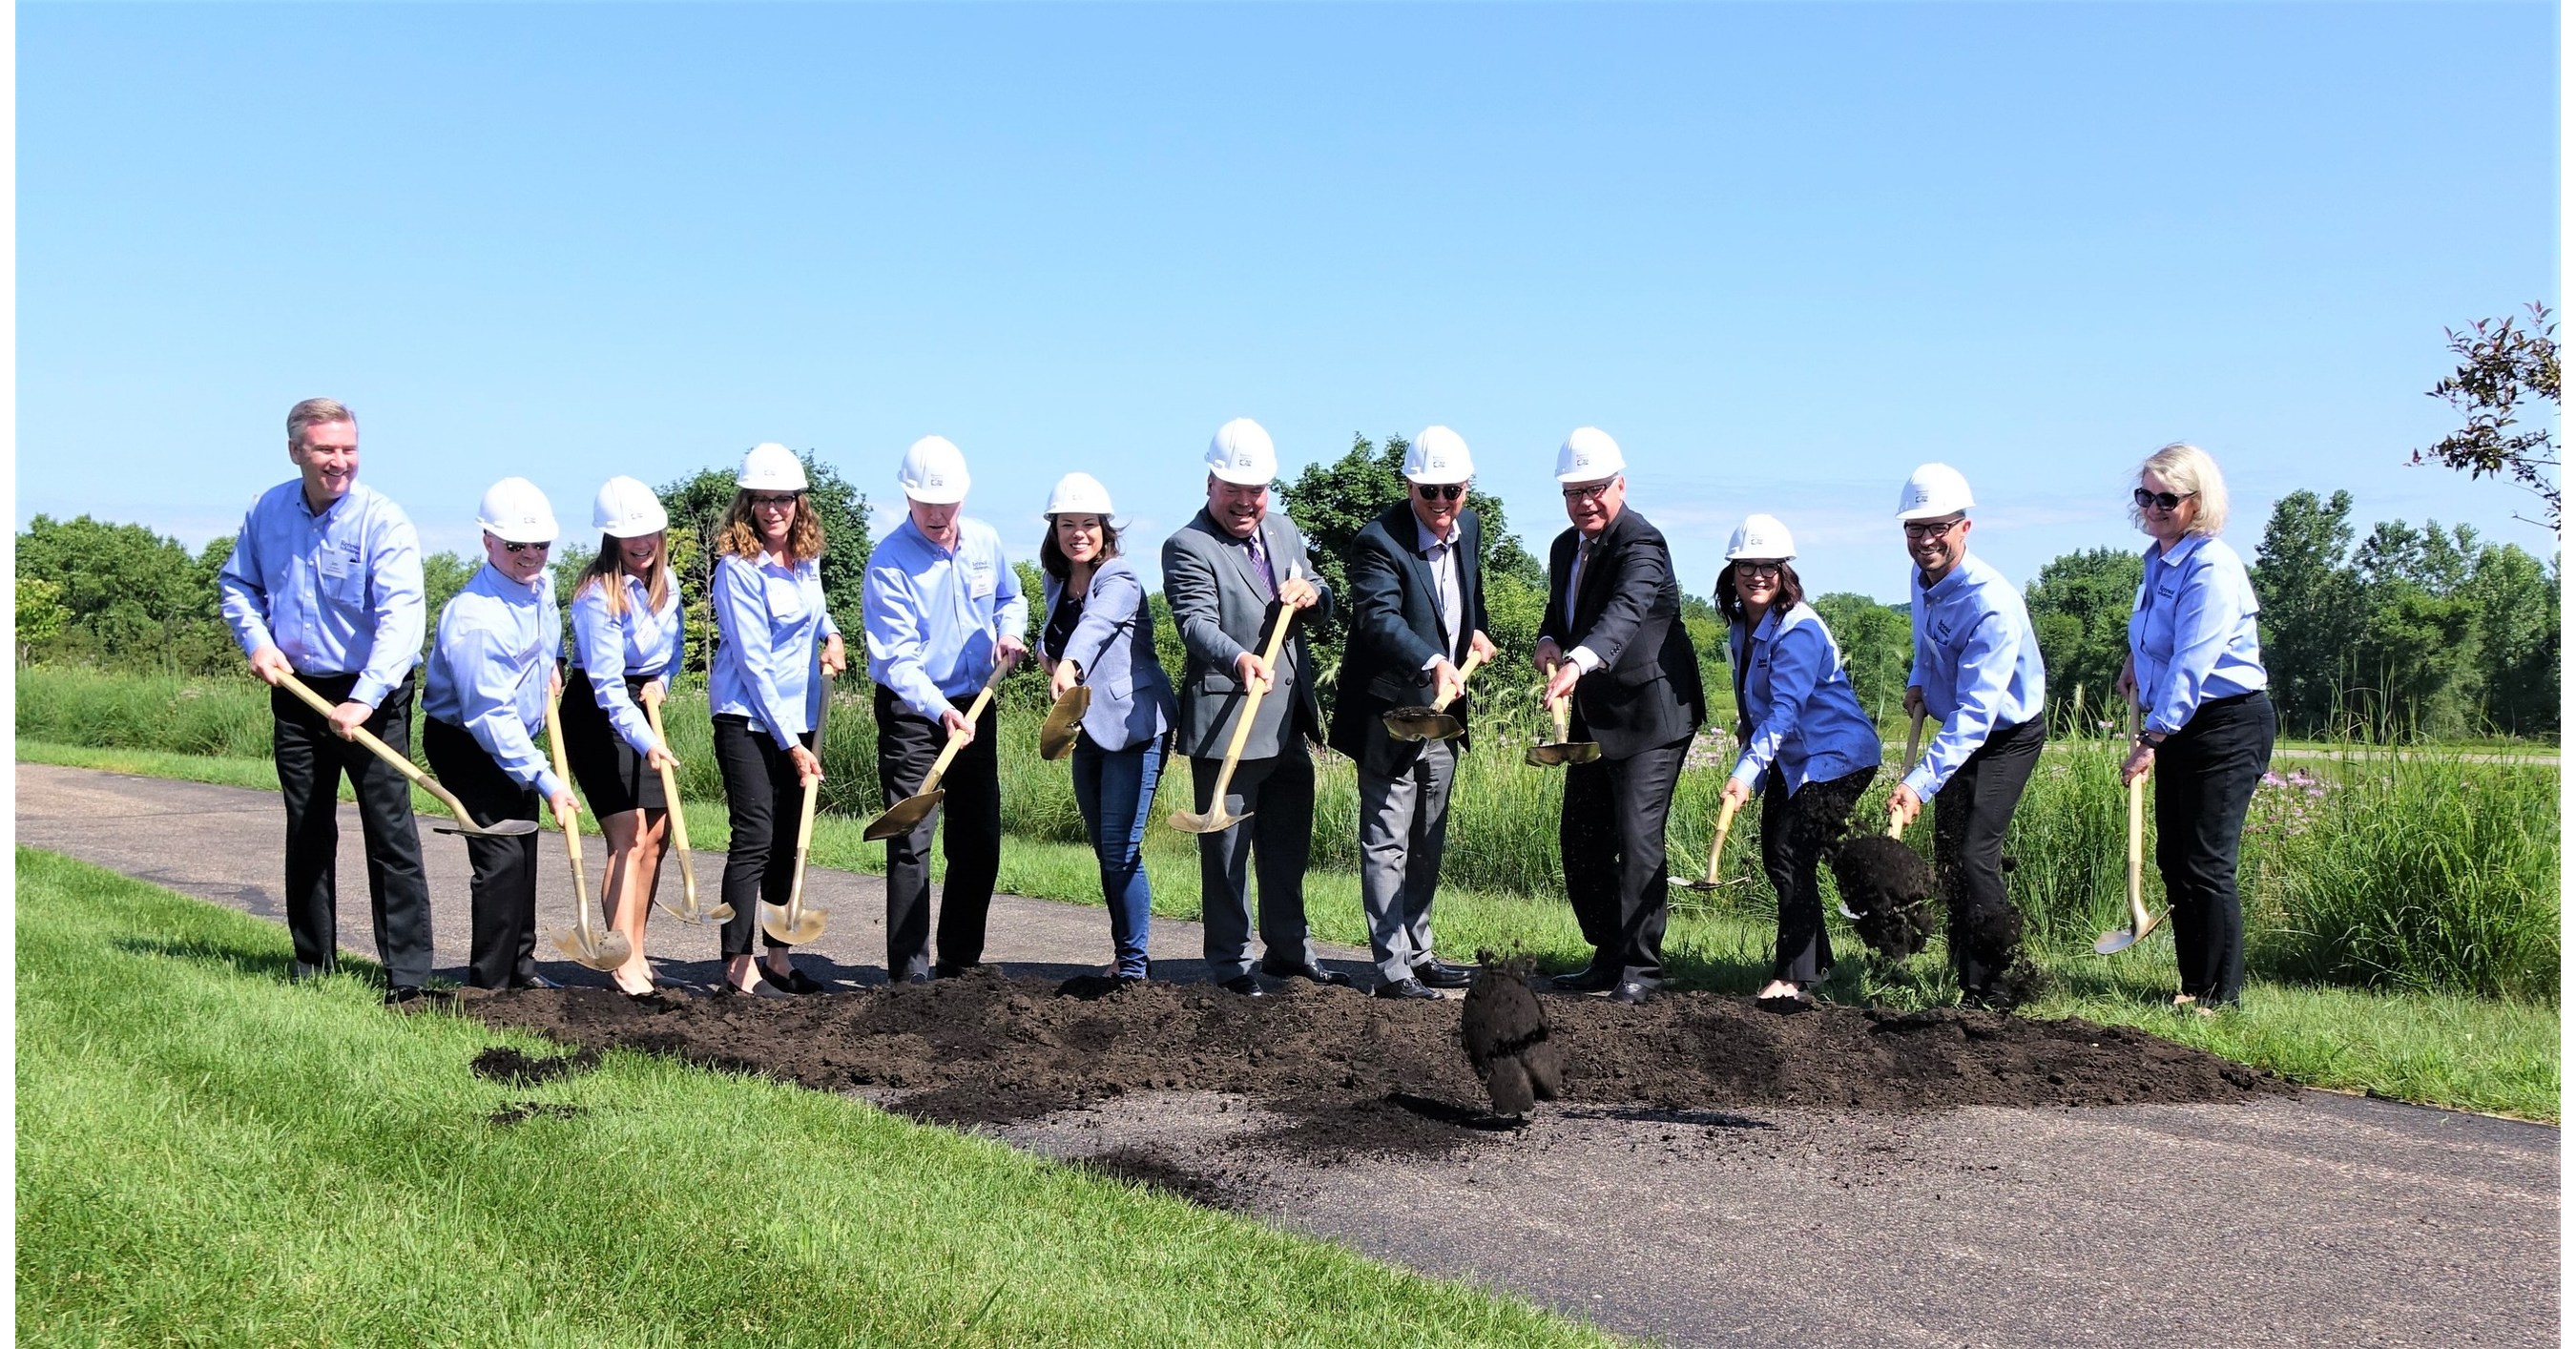 Andersen Corporation Breaks Ground on $35 Million Expansion of Renewal by Andersen Manufacturing Campus in Cottage Grove